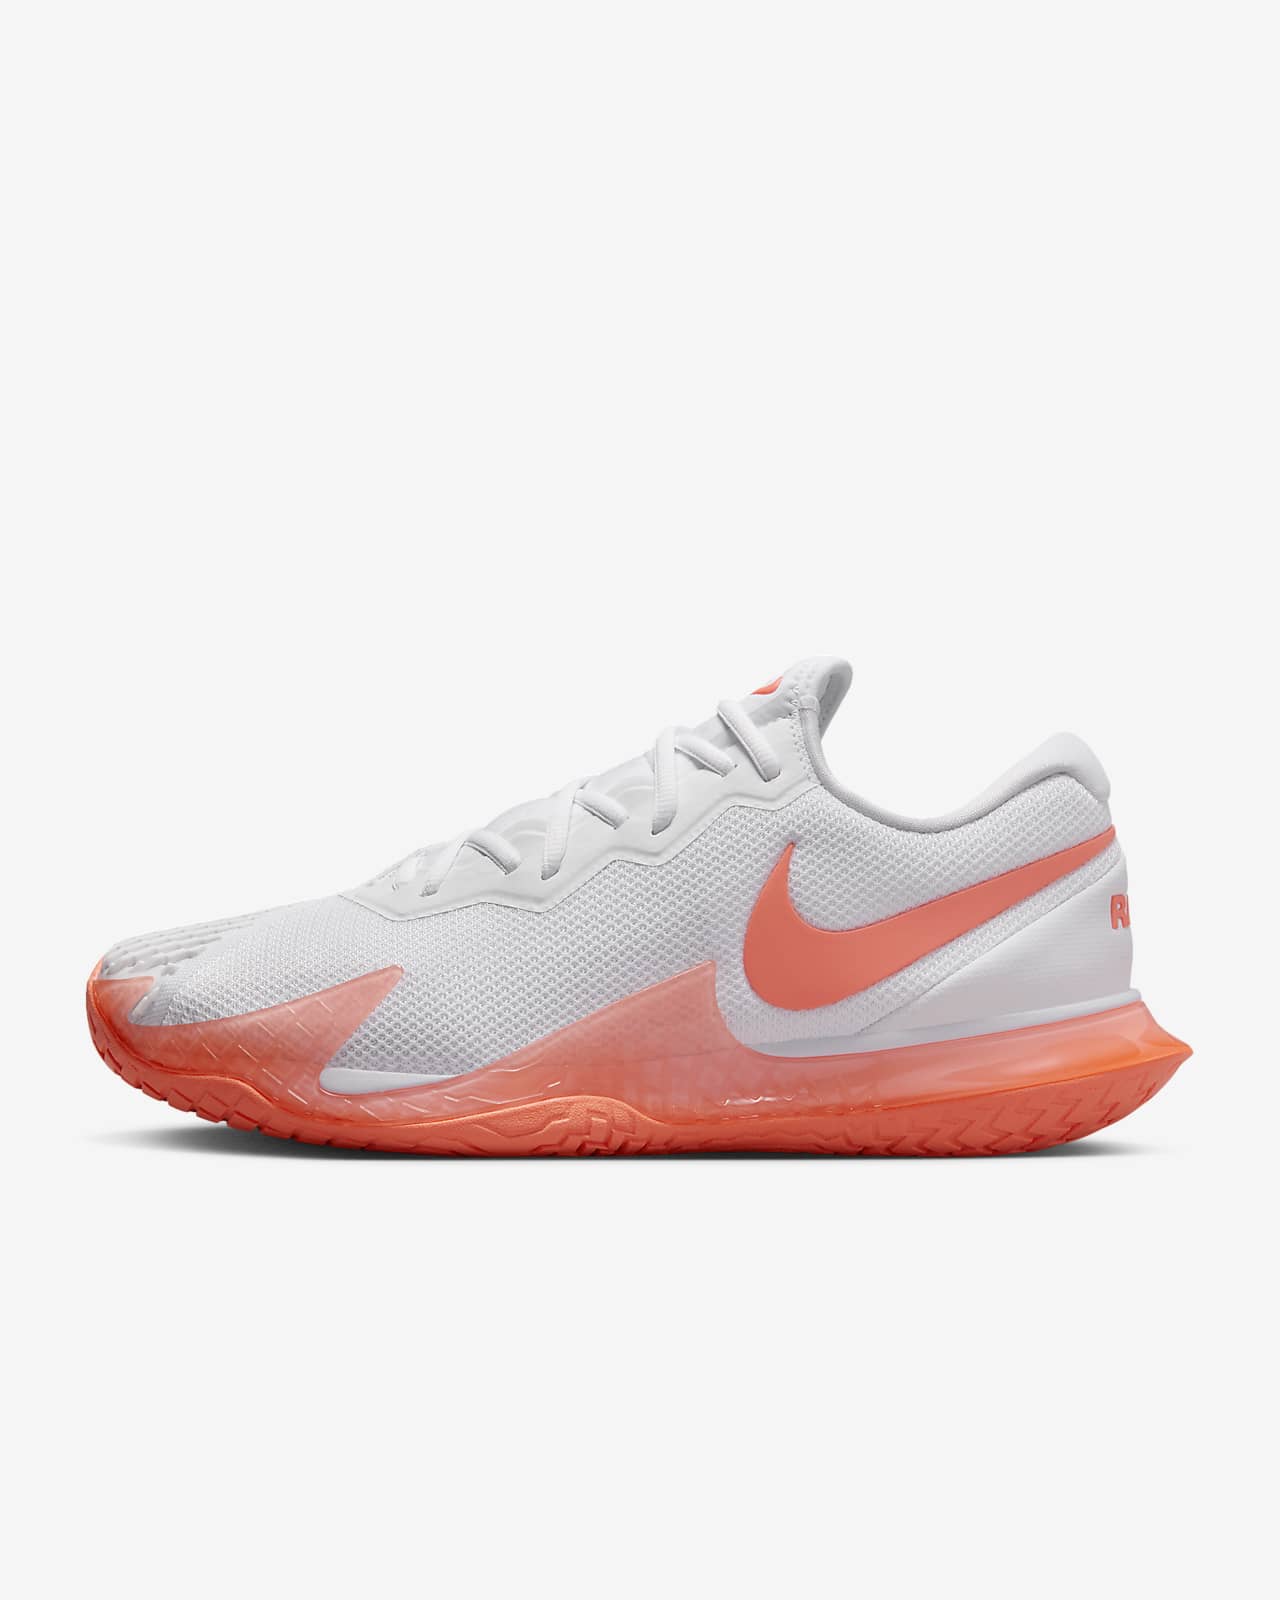 Performance Features of Nike Court Zoom Vapor Cage 4